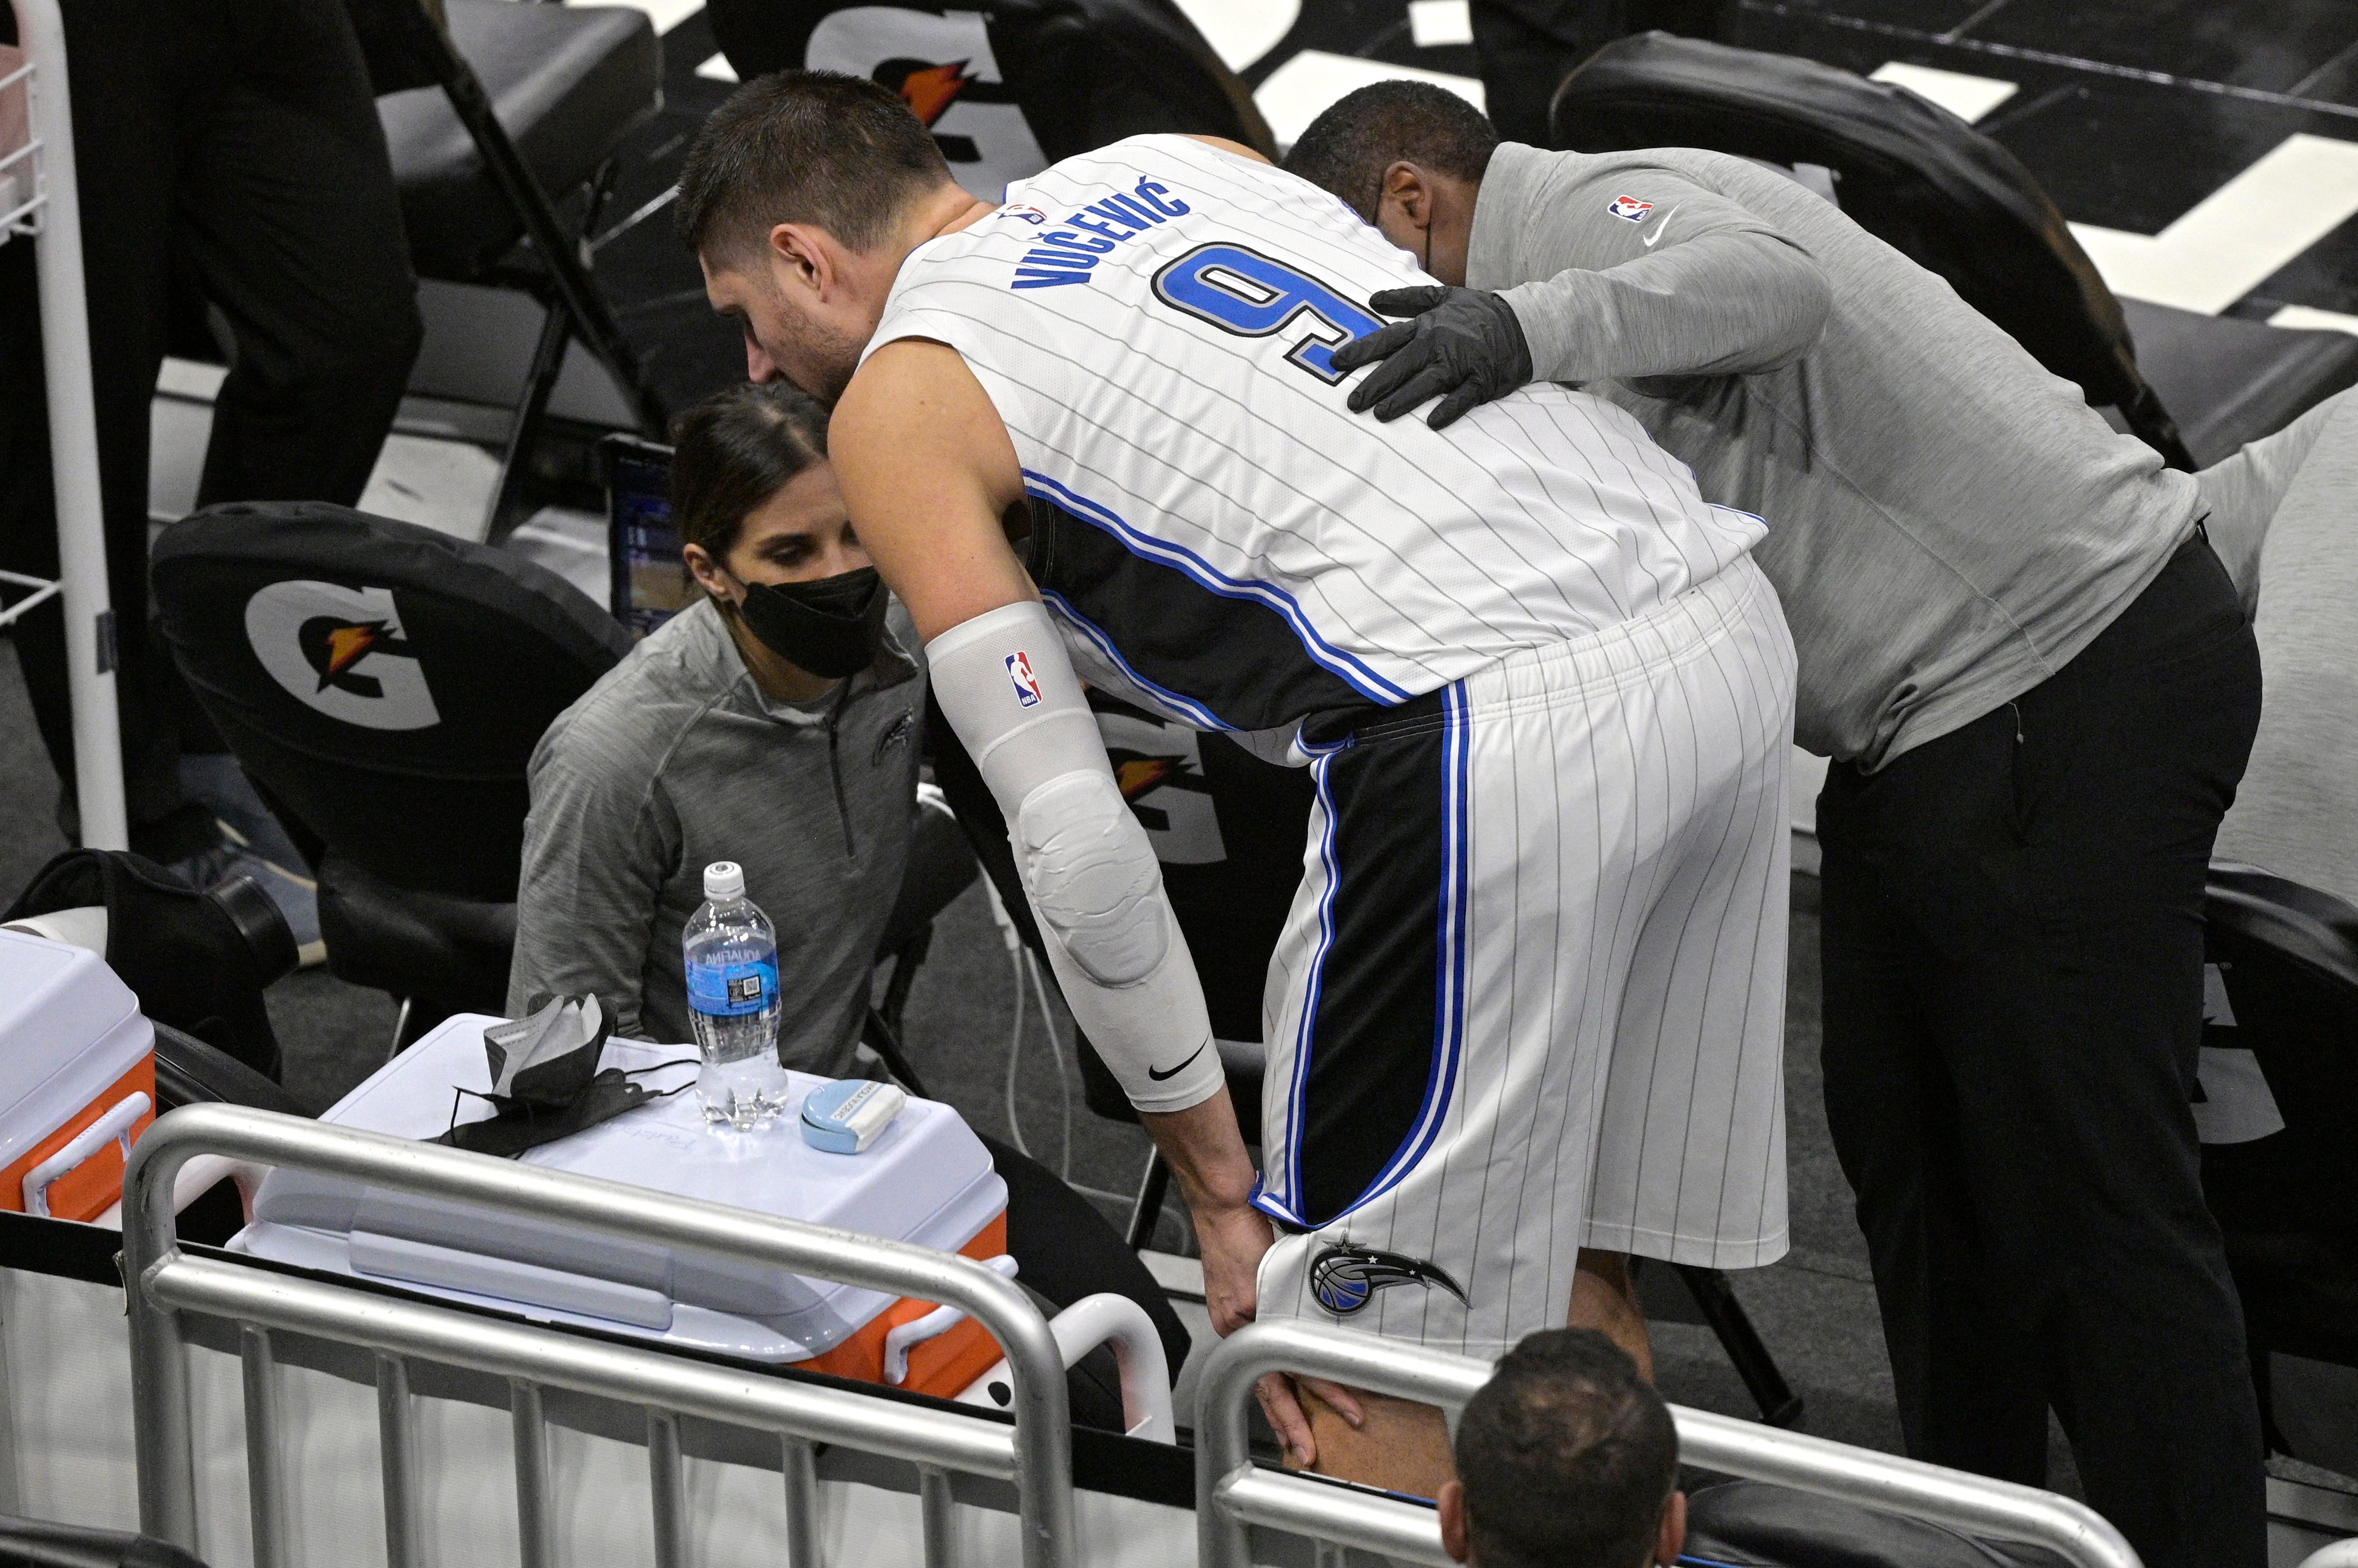 Orlando Magic center Nikola Vucevic (9) holds his knee as he is helped by trainers behind the bench area during the first half of an NBA basketball game against the Detroit Pistons.